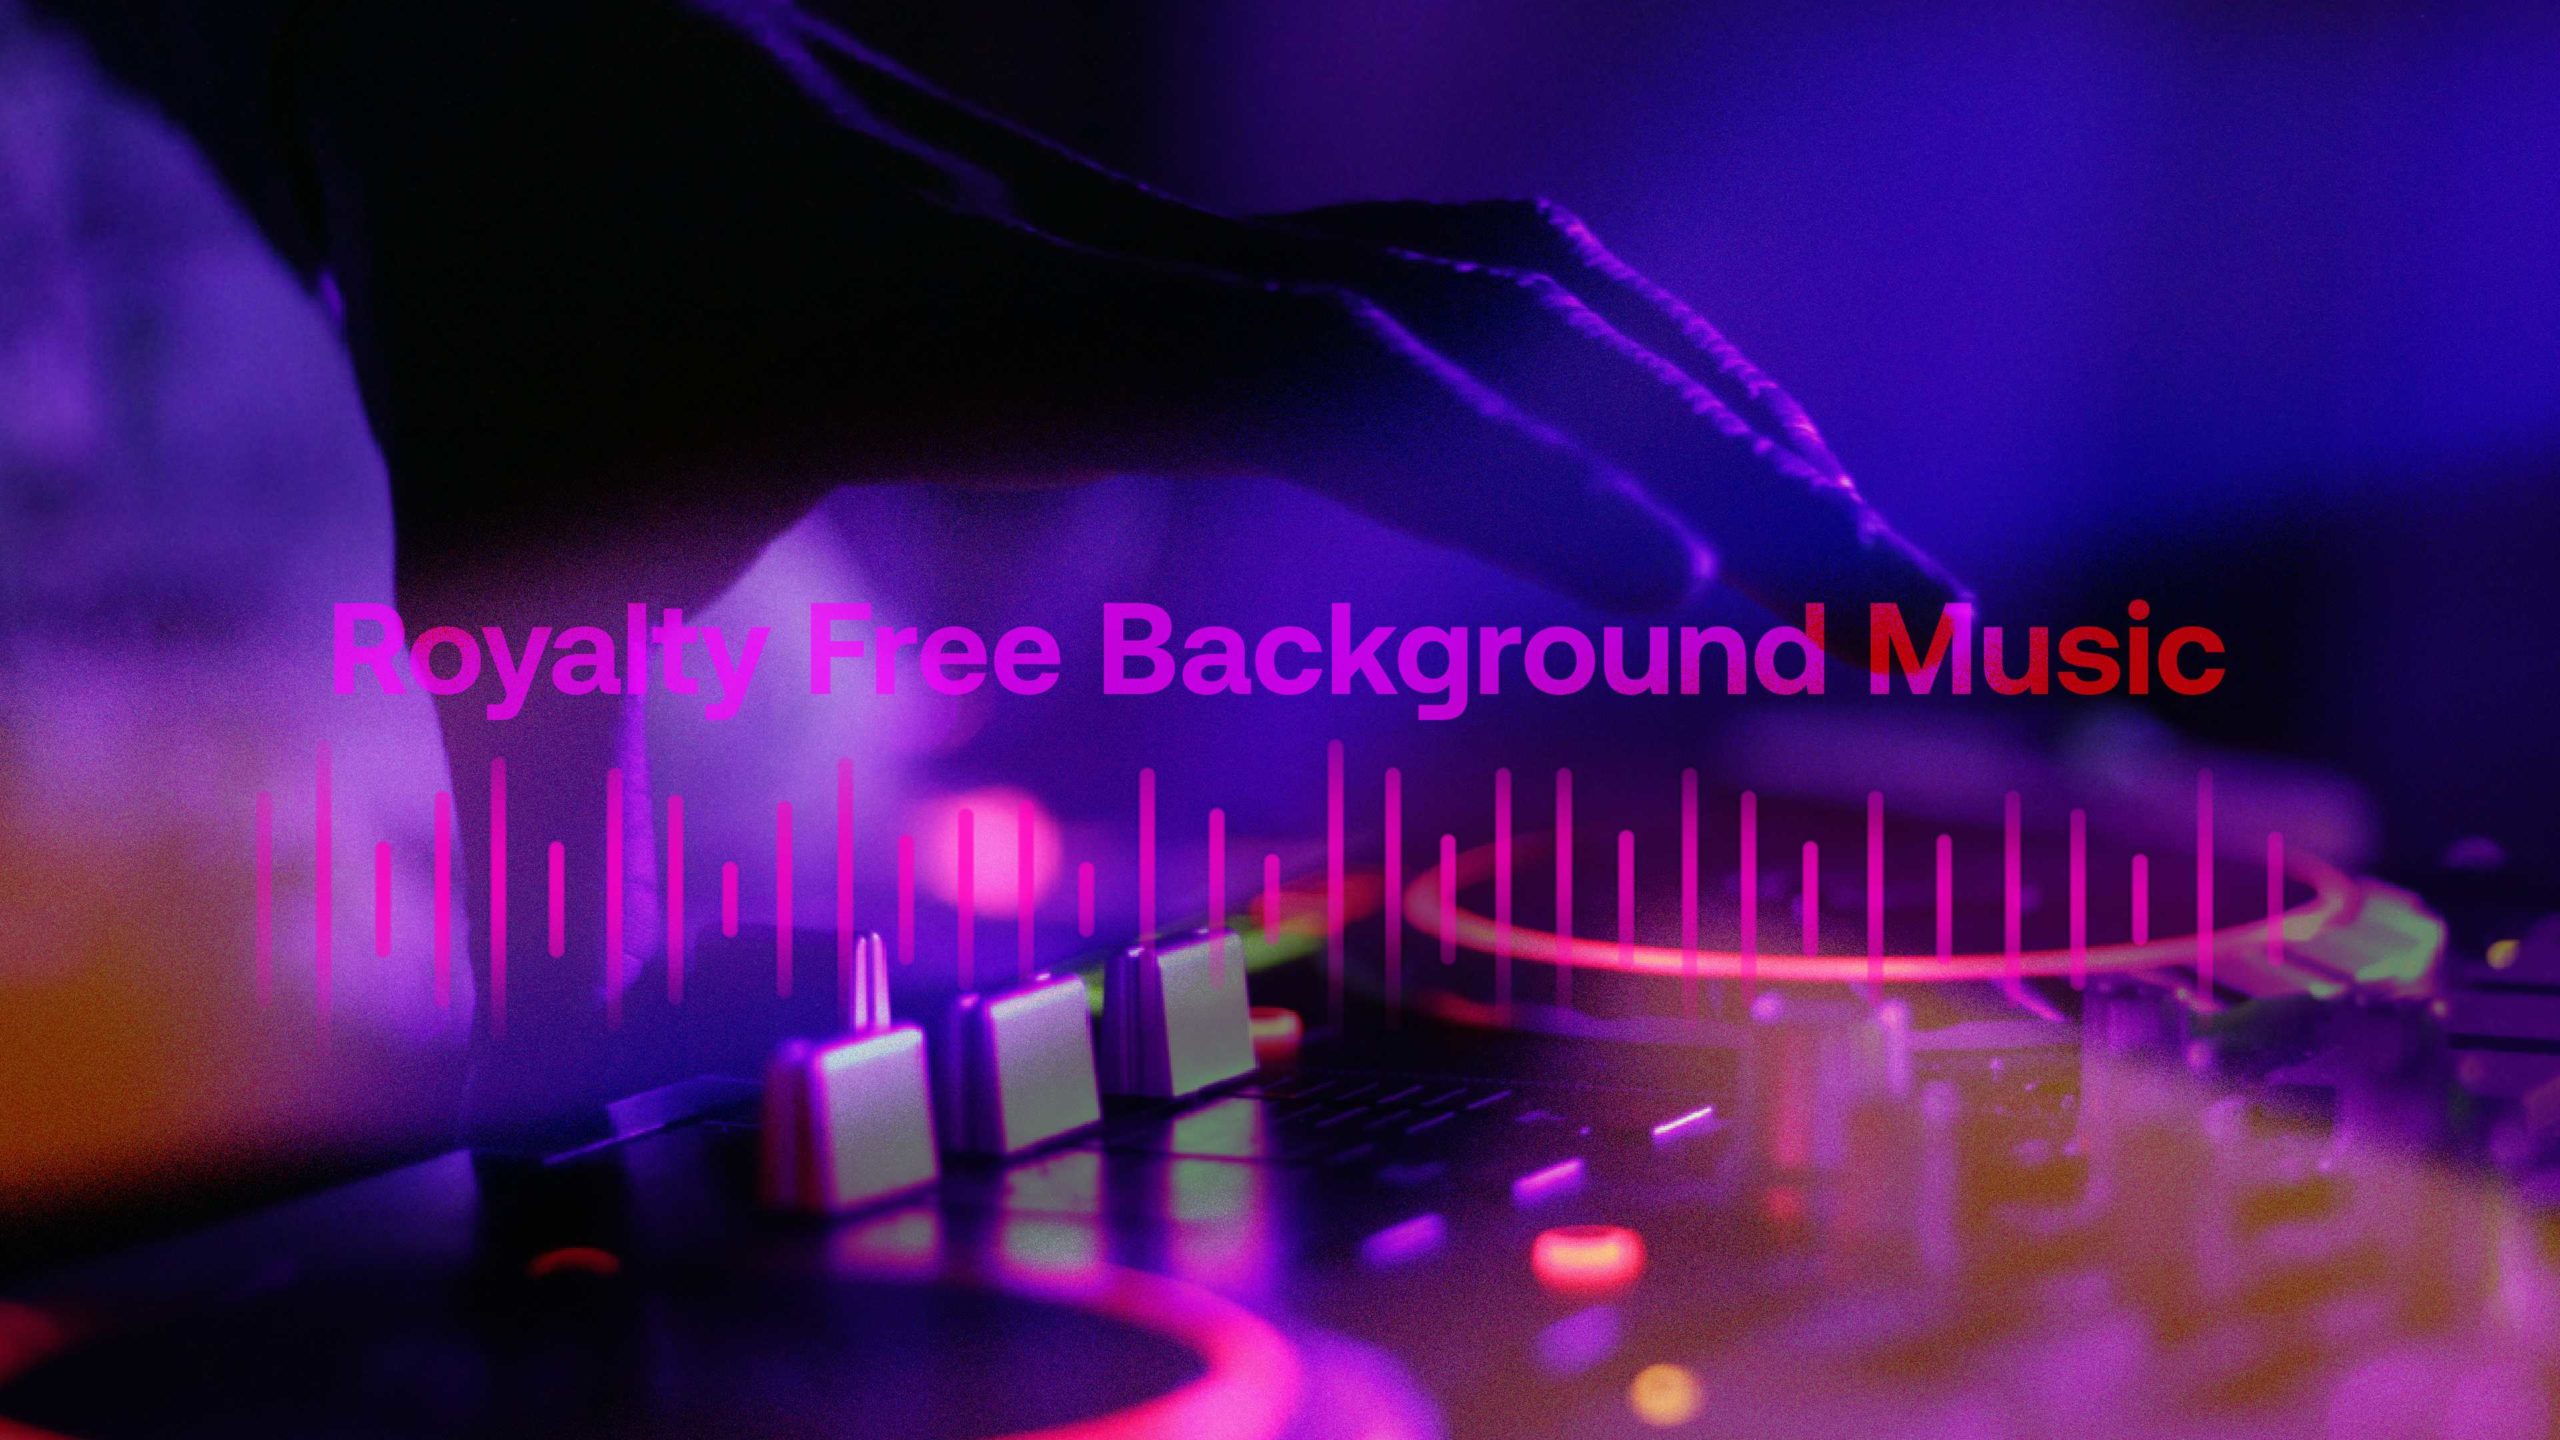 Top 20 Fun & Upbeat Royalty Free Background Music (Free Downloads) - Motion  Array